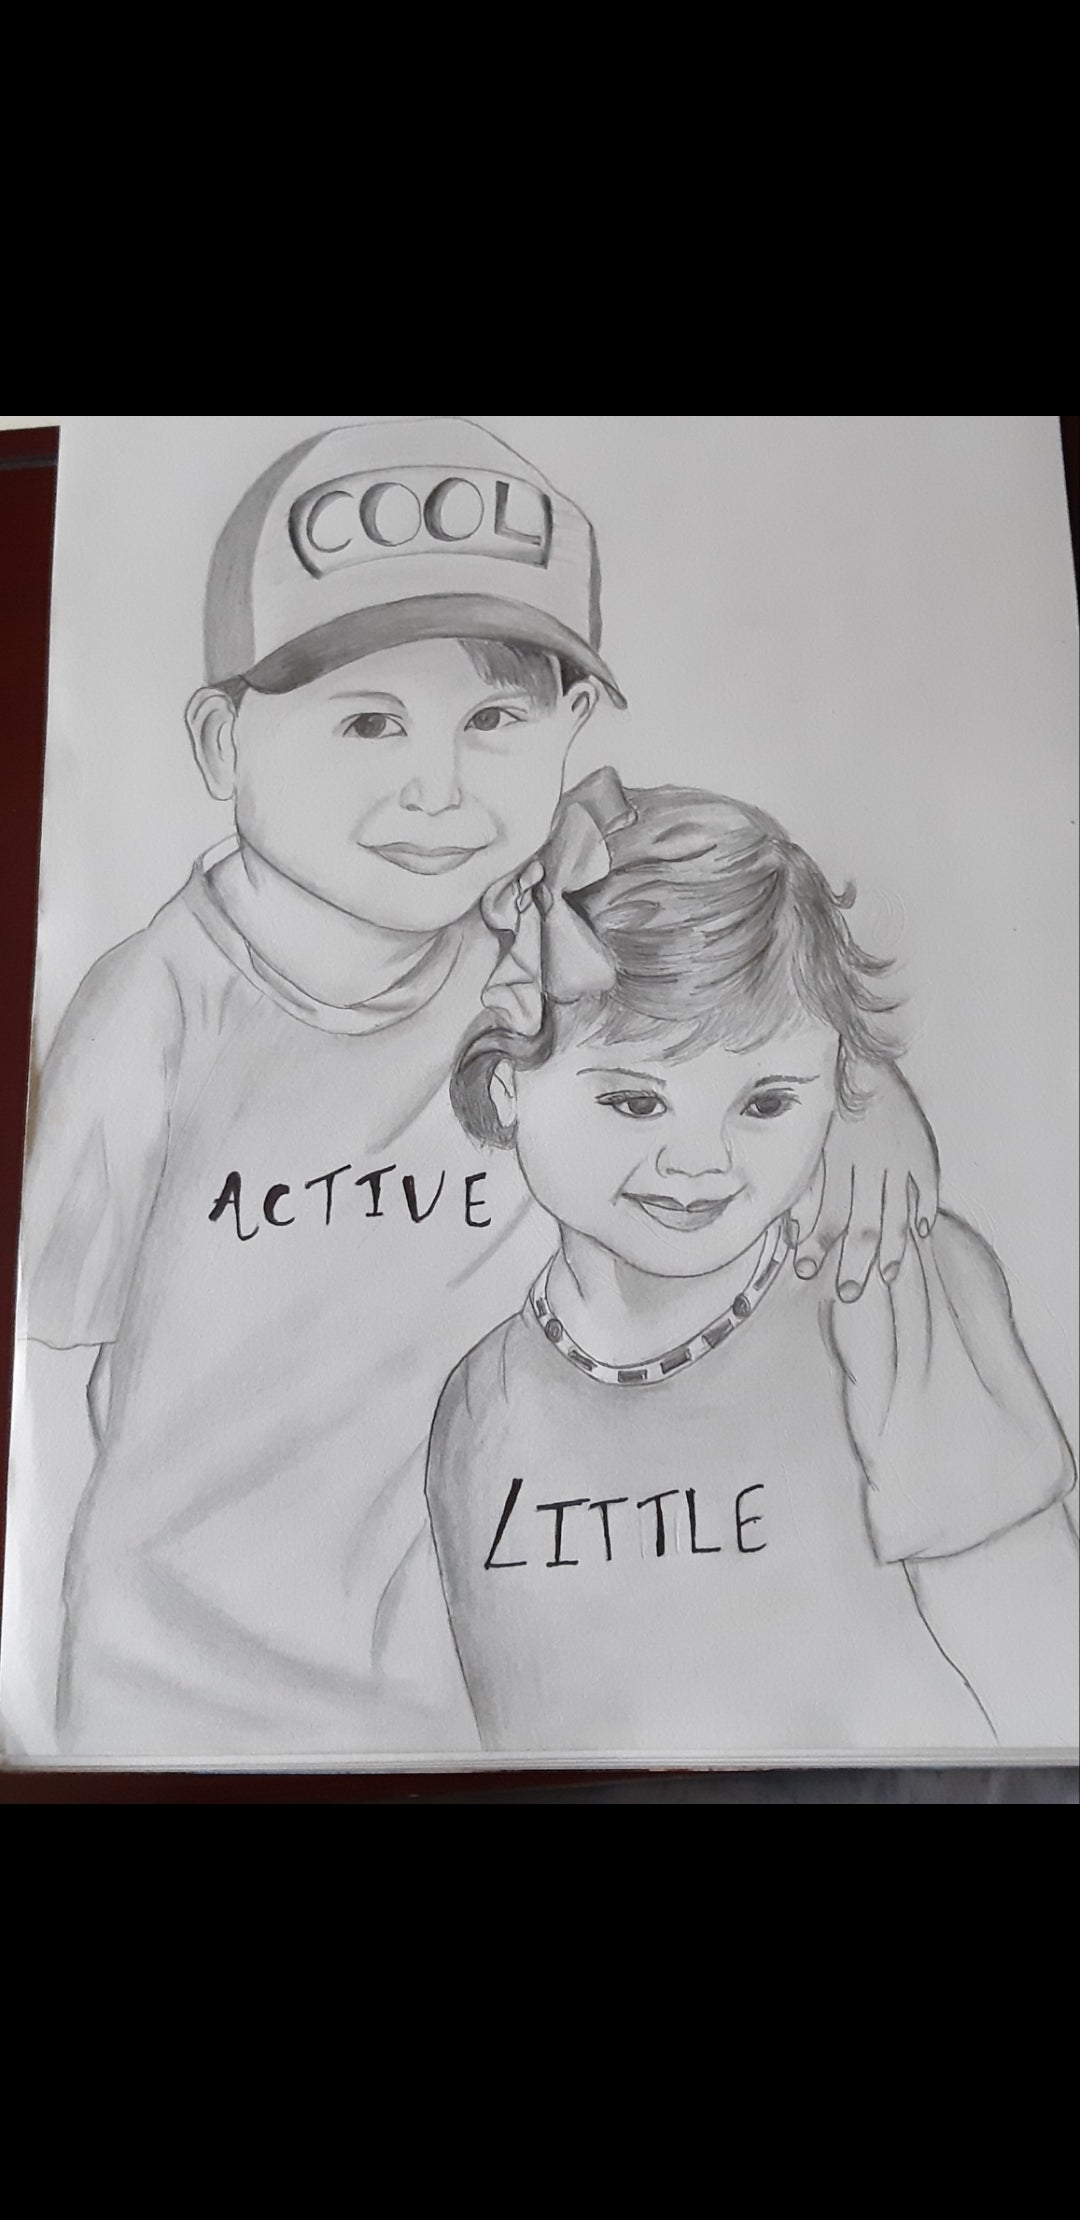 Hanu drawings - My new drawing of of me and my sister | Facebook